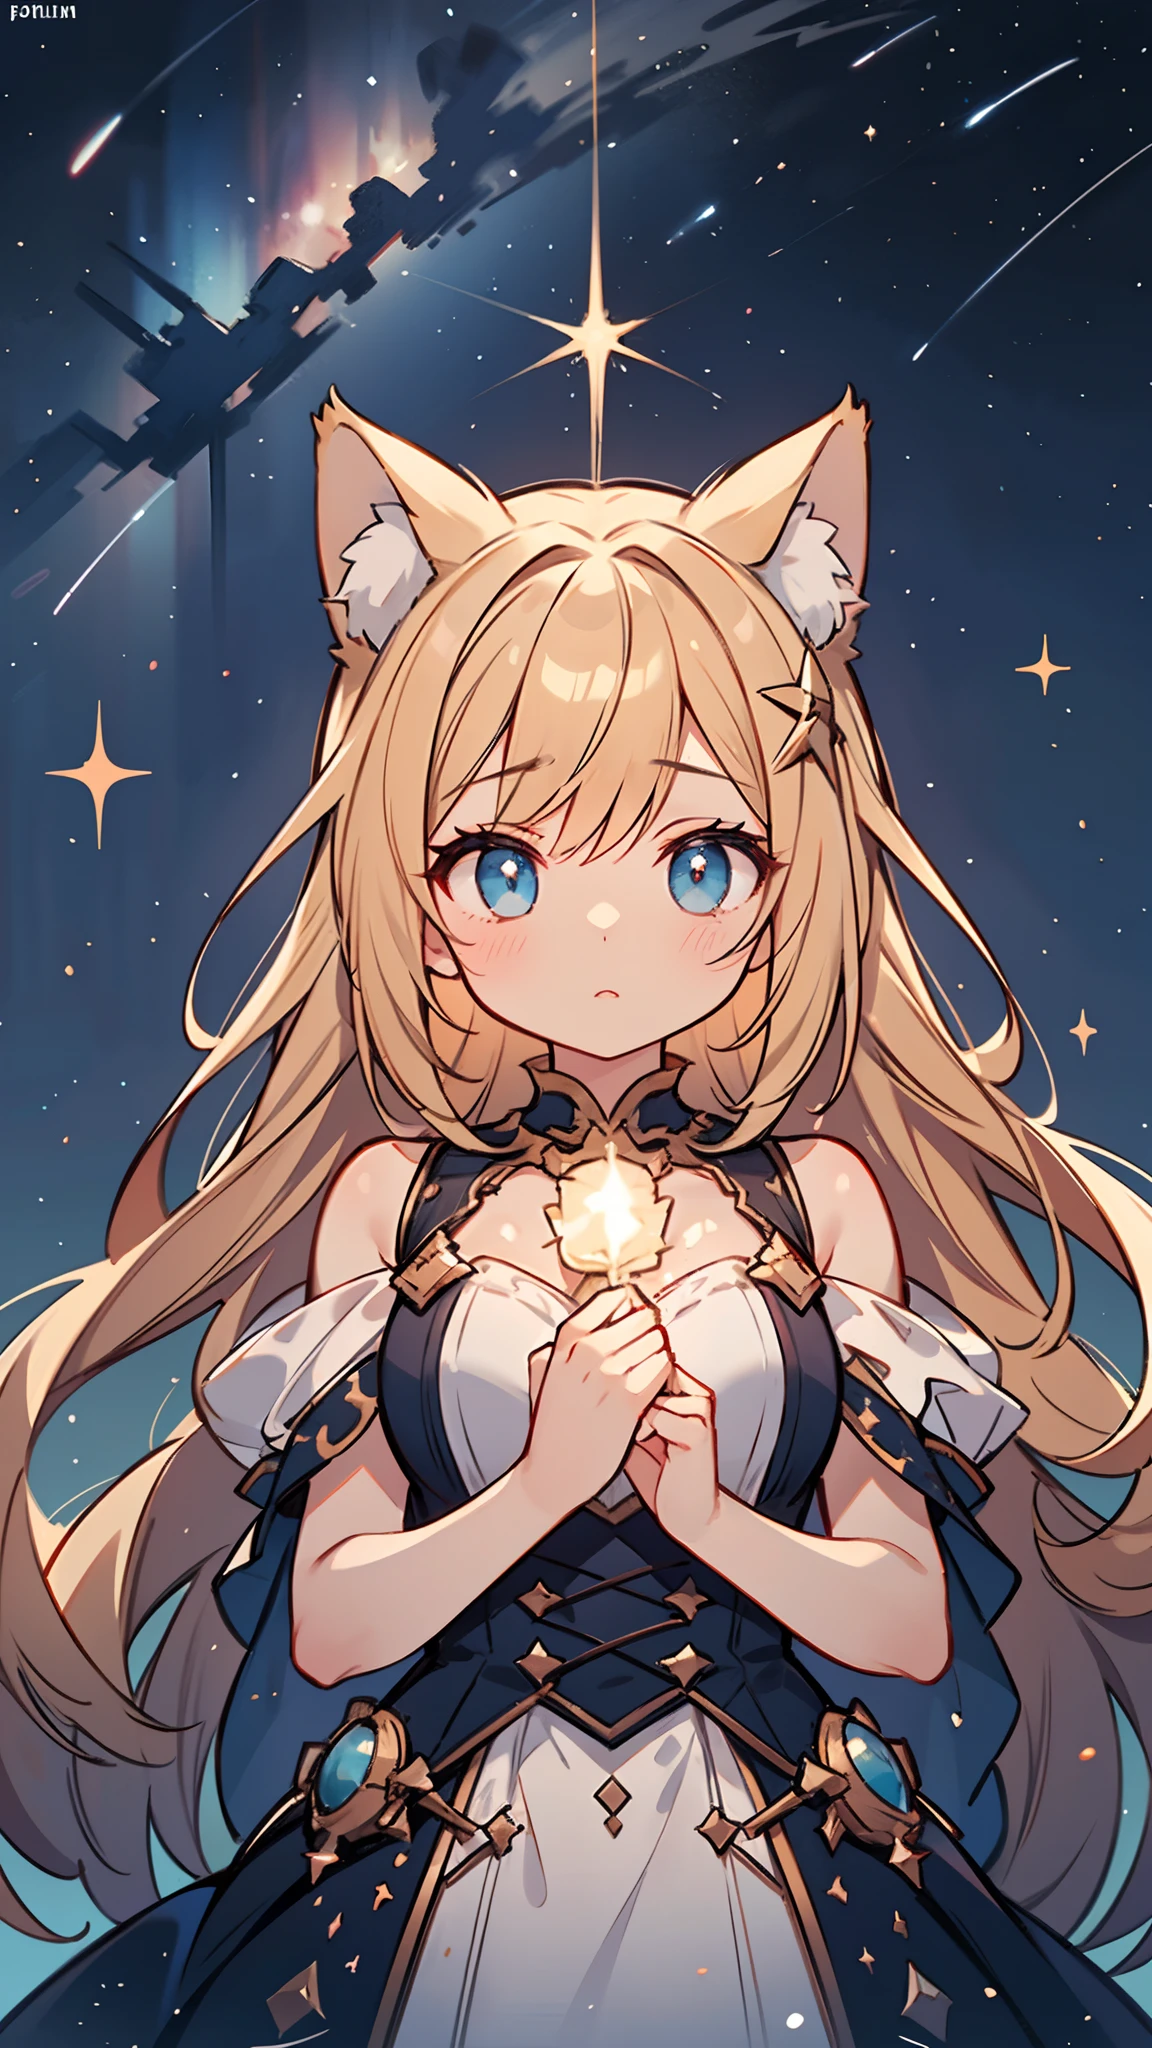 "An alluring cat girl captivated by the serene night, engulfed in the enchanting splendor of a celestial constellation and the mesmerizing beauty of the Milky Way.", masterpiece, cinematic lighting, dramatic feeling, expressive, animal ears, mesmerizing eyes